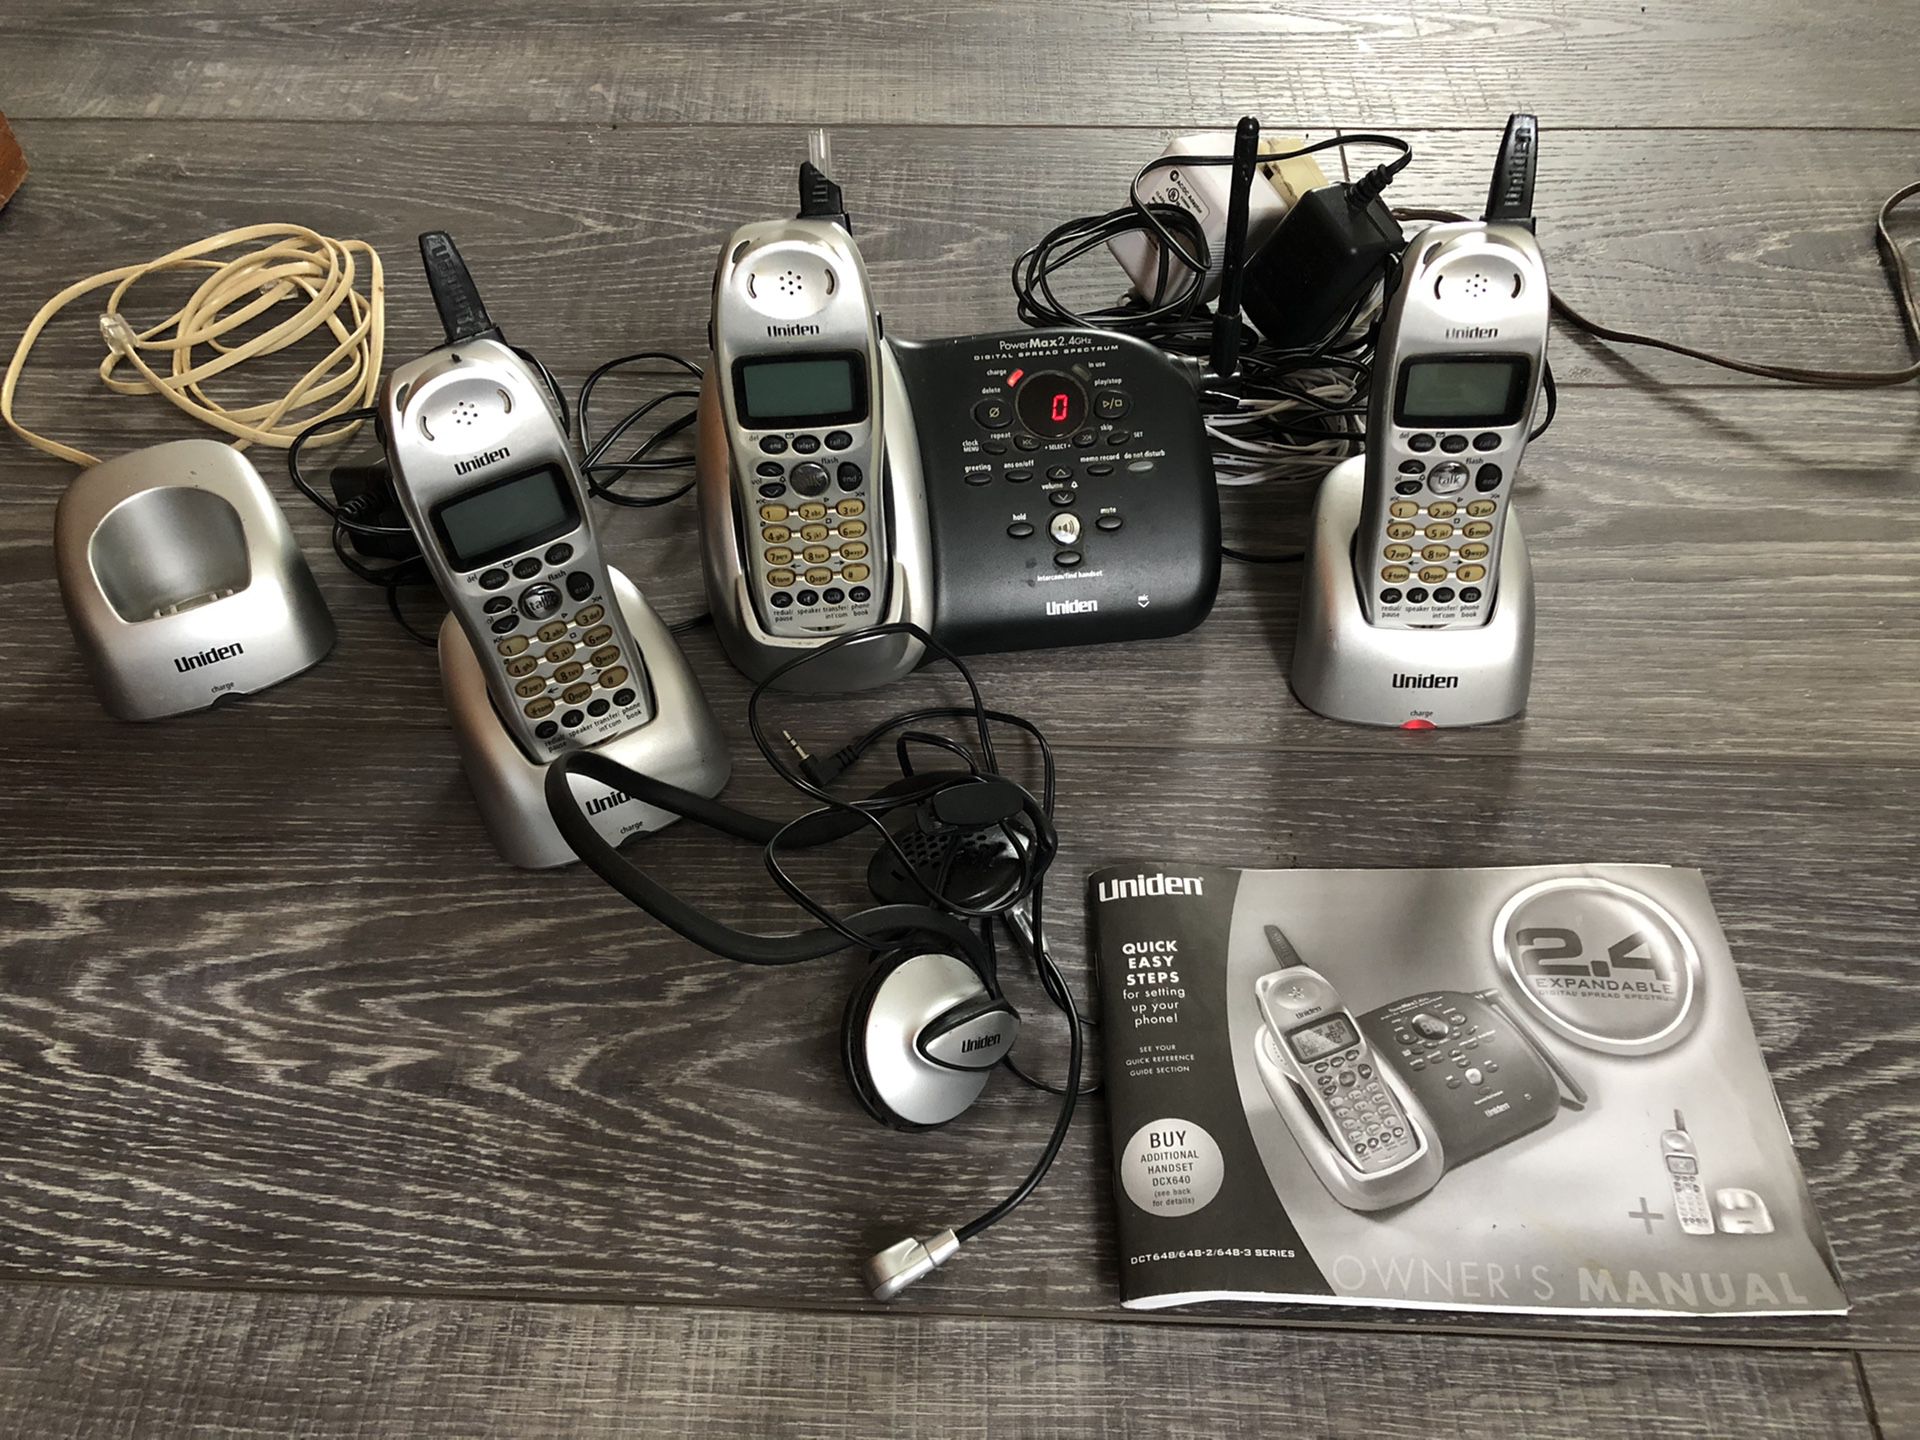 Uniden Wireless Phone and Answering Machine